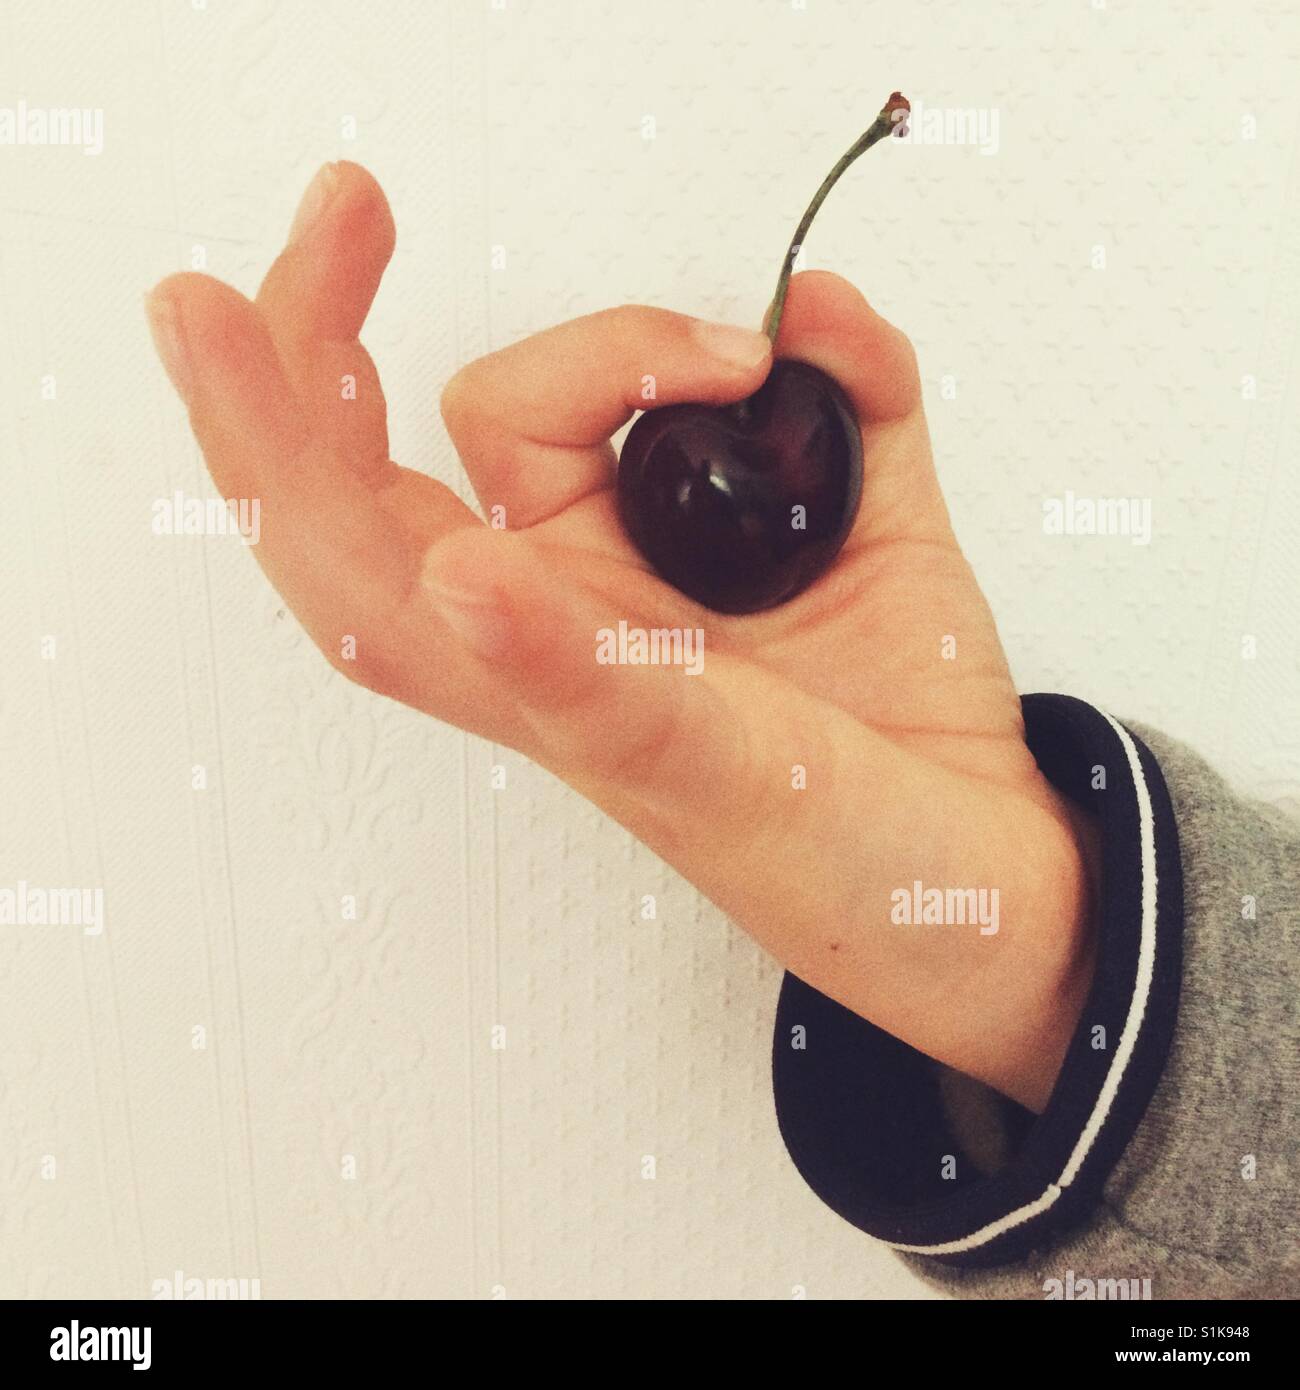 Eight year old boys hand holding a large black cherry. Stock Photo